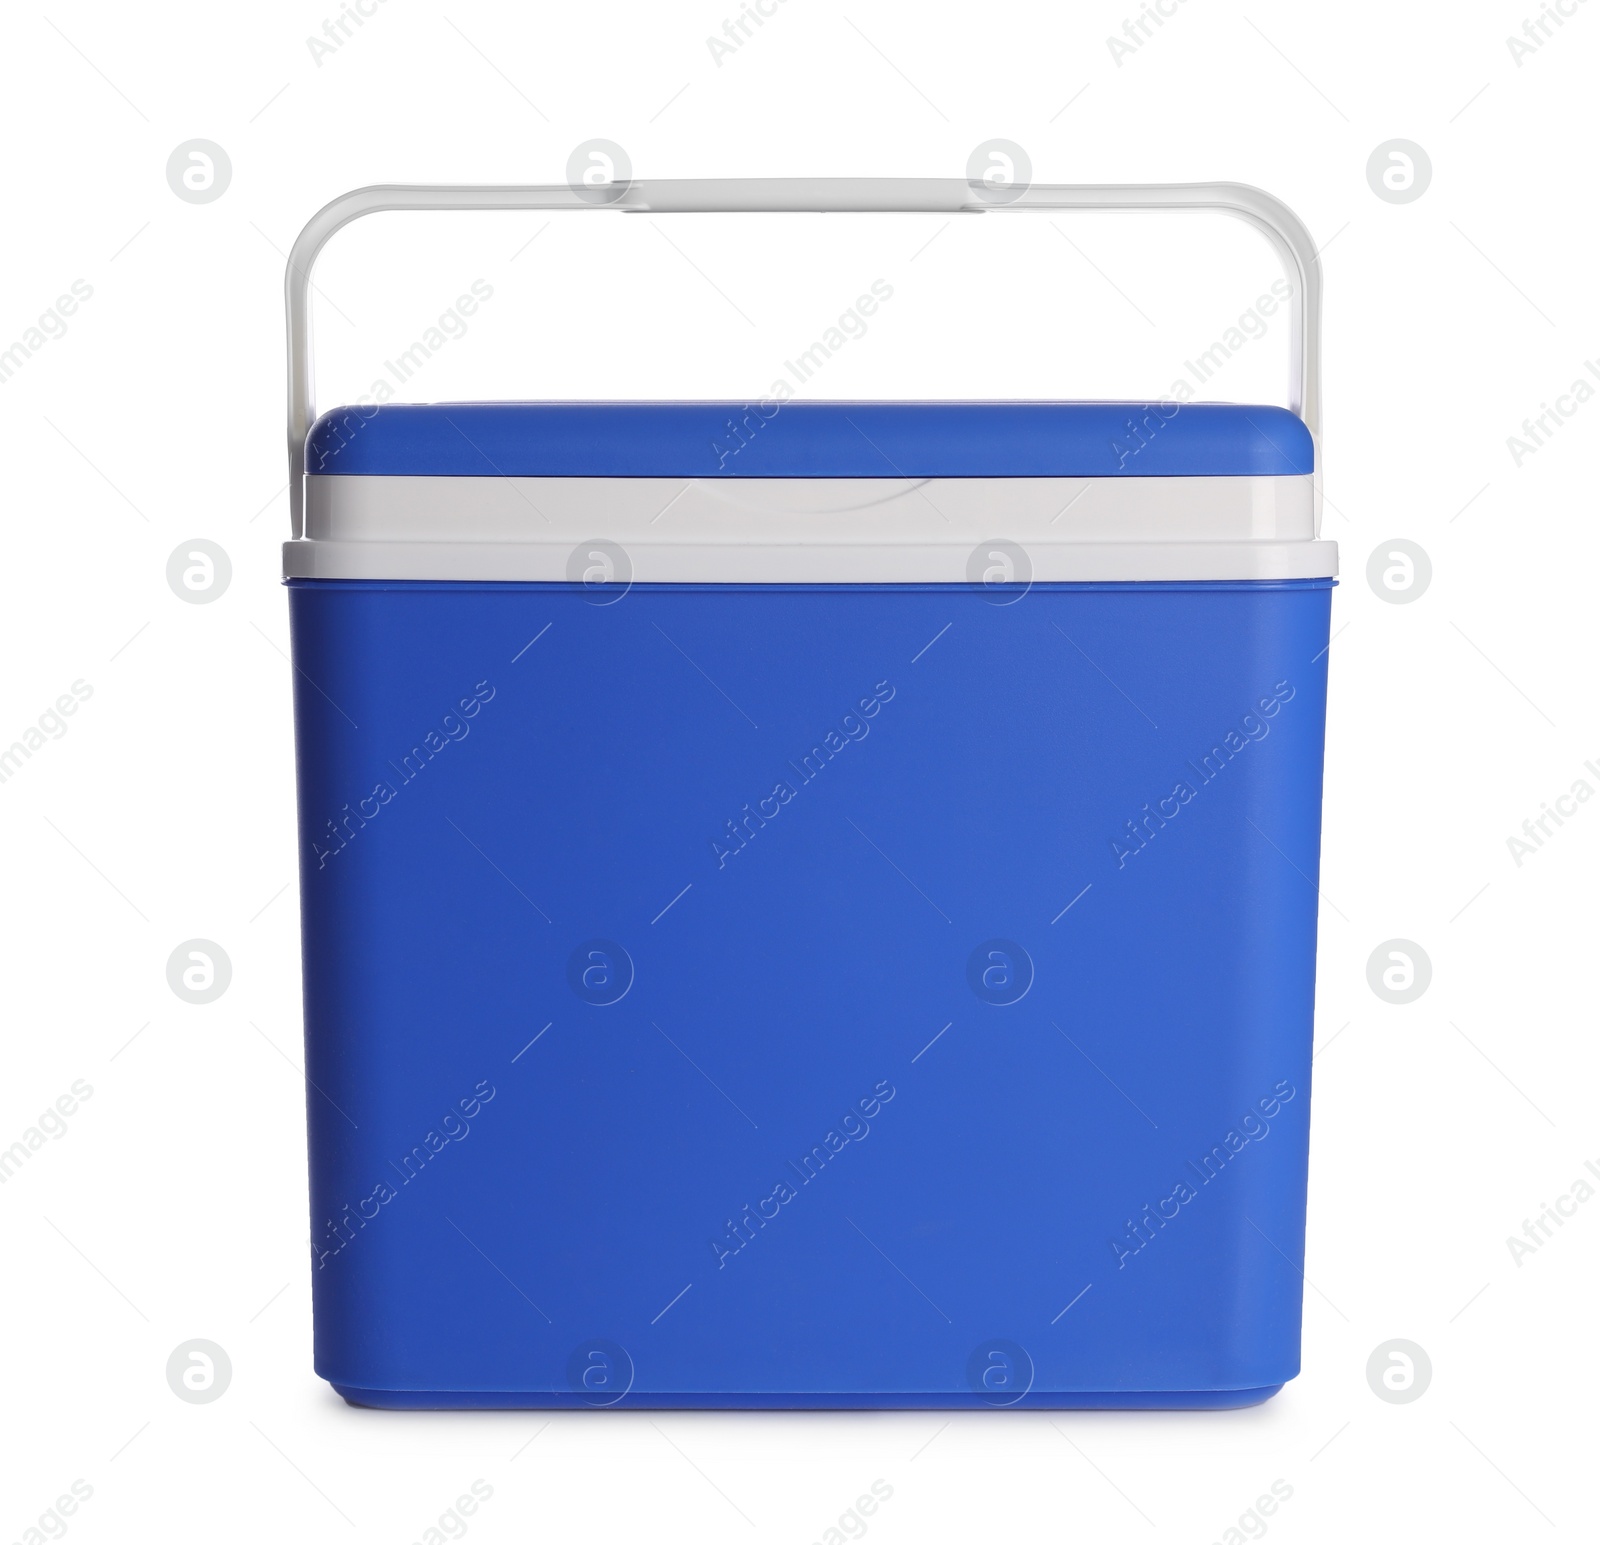 Photo of Closed blue plastic cool box isolated on white